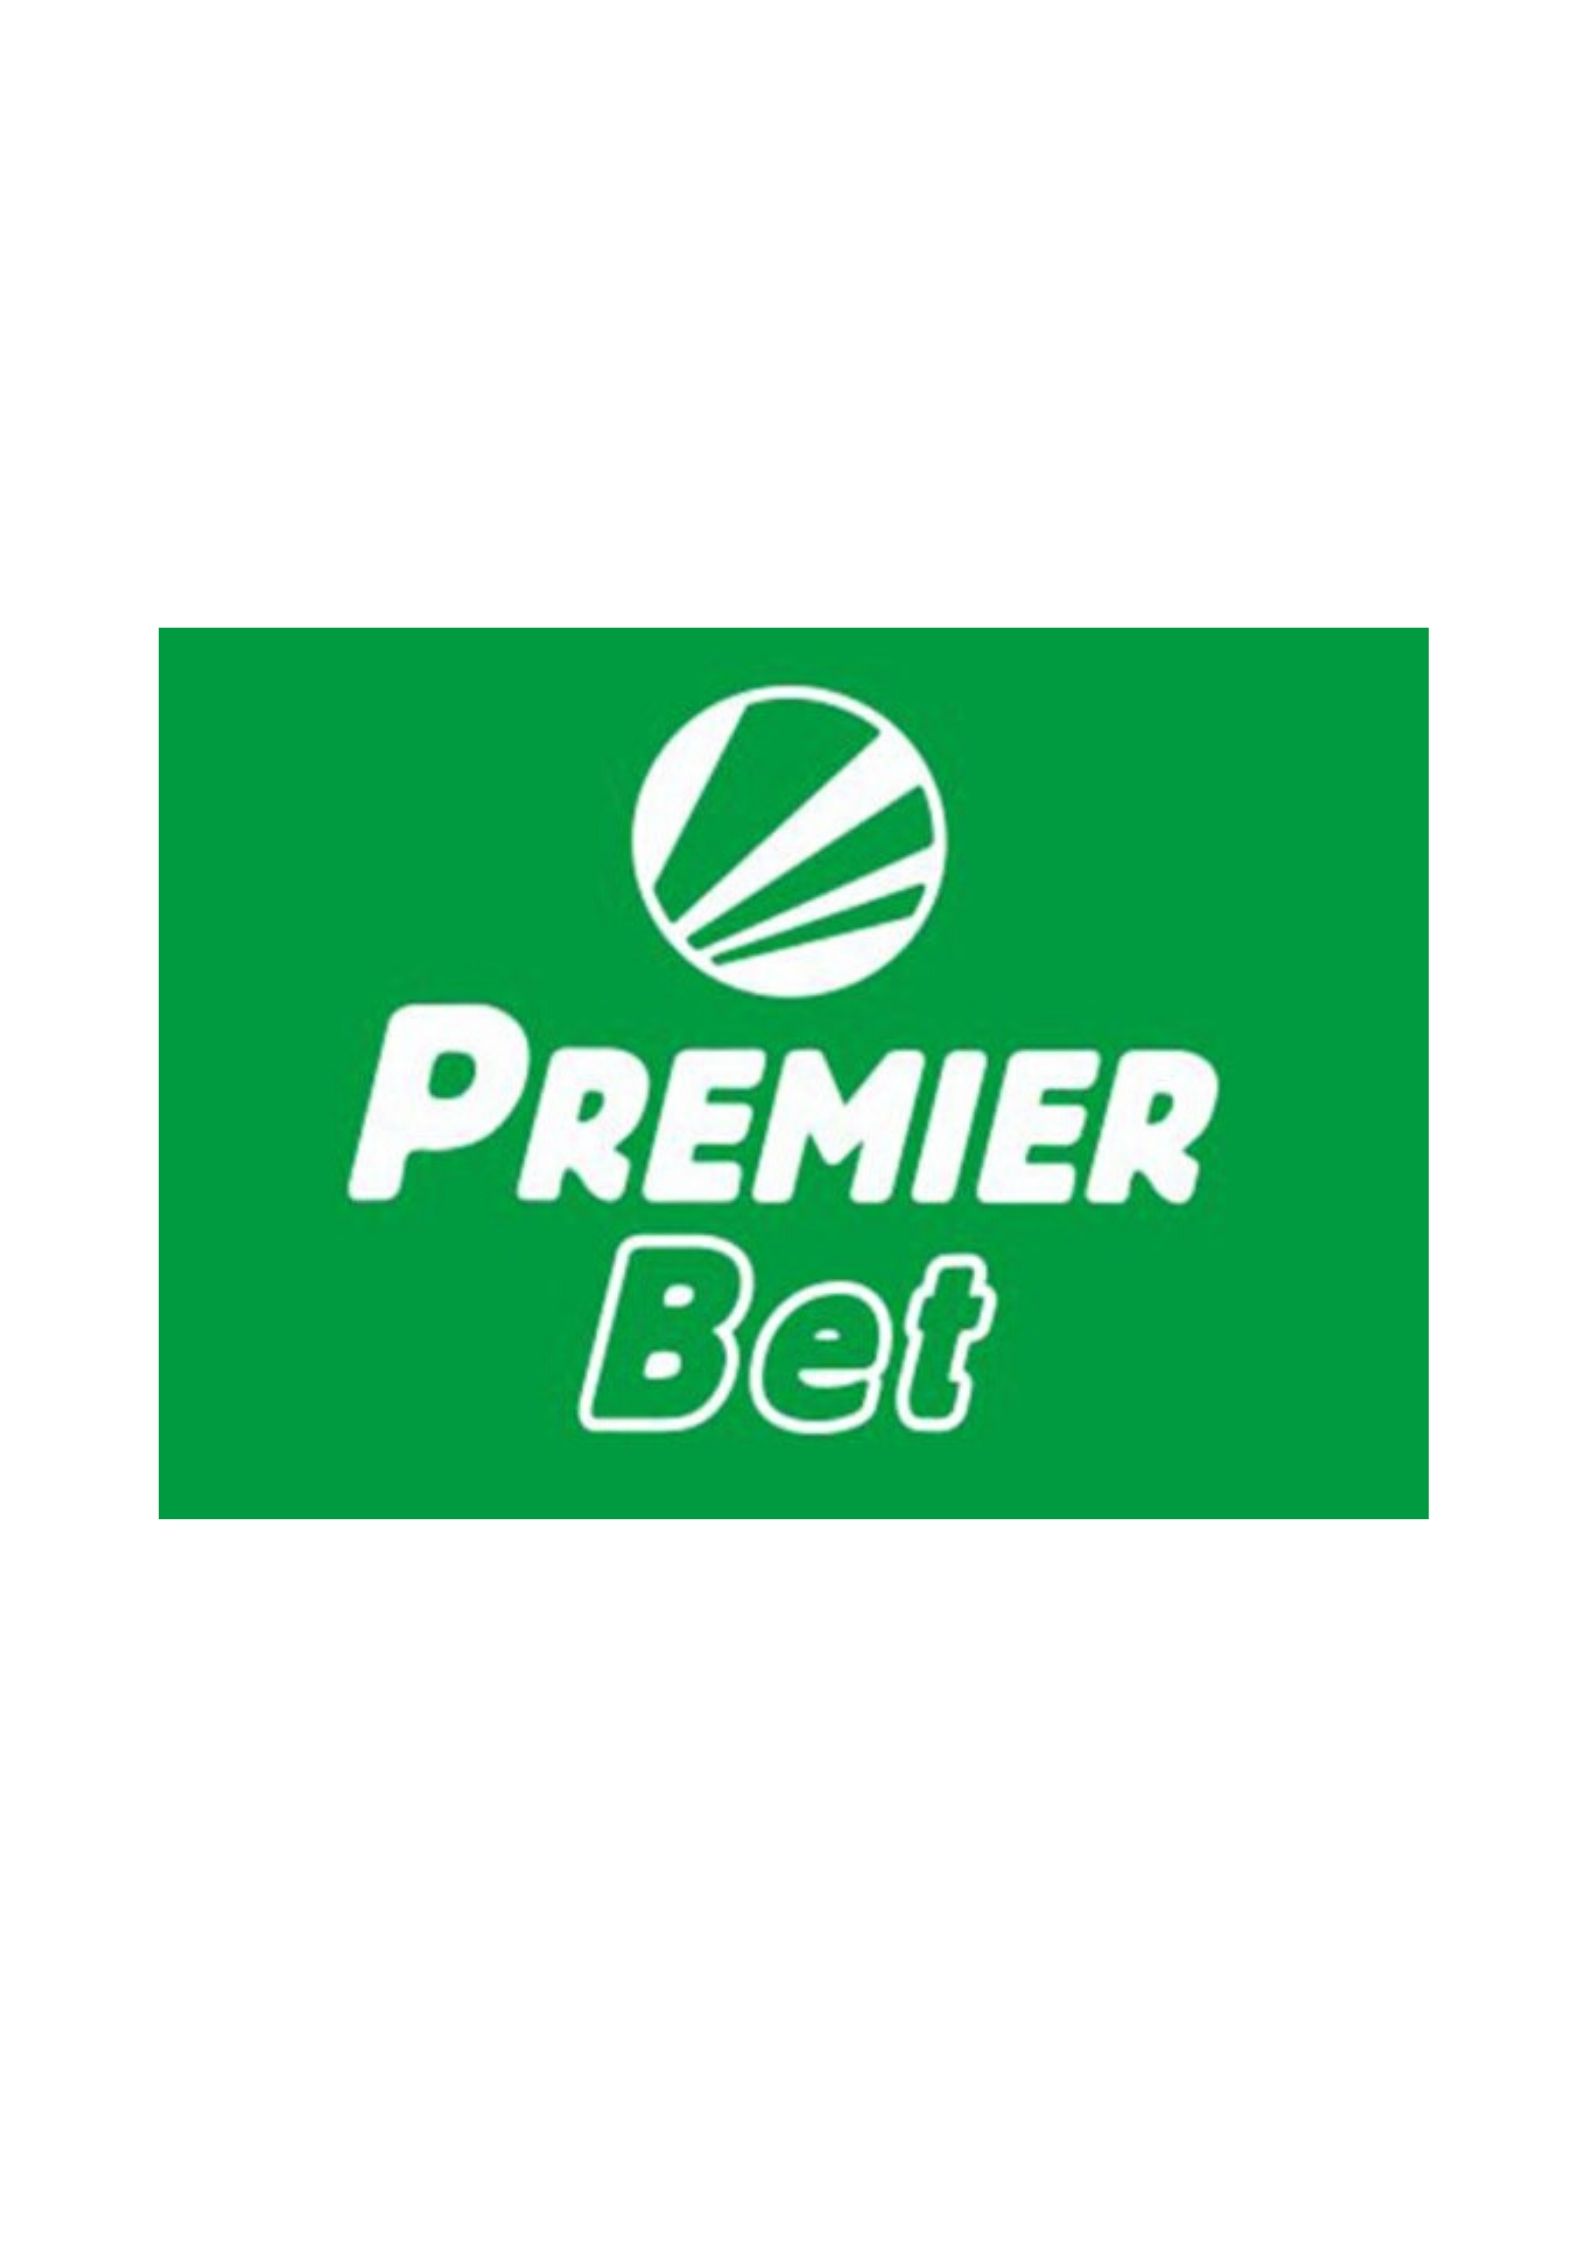 PremierBet Kenya - Know What Other Players are Saying.